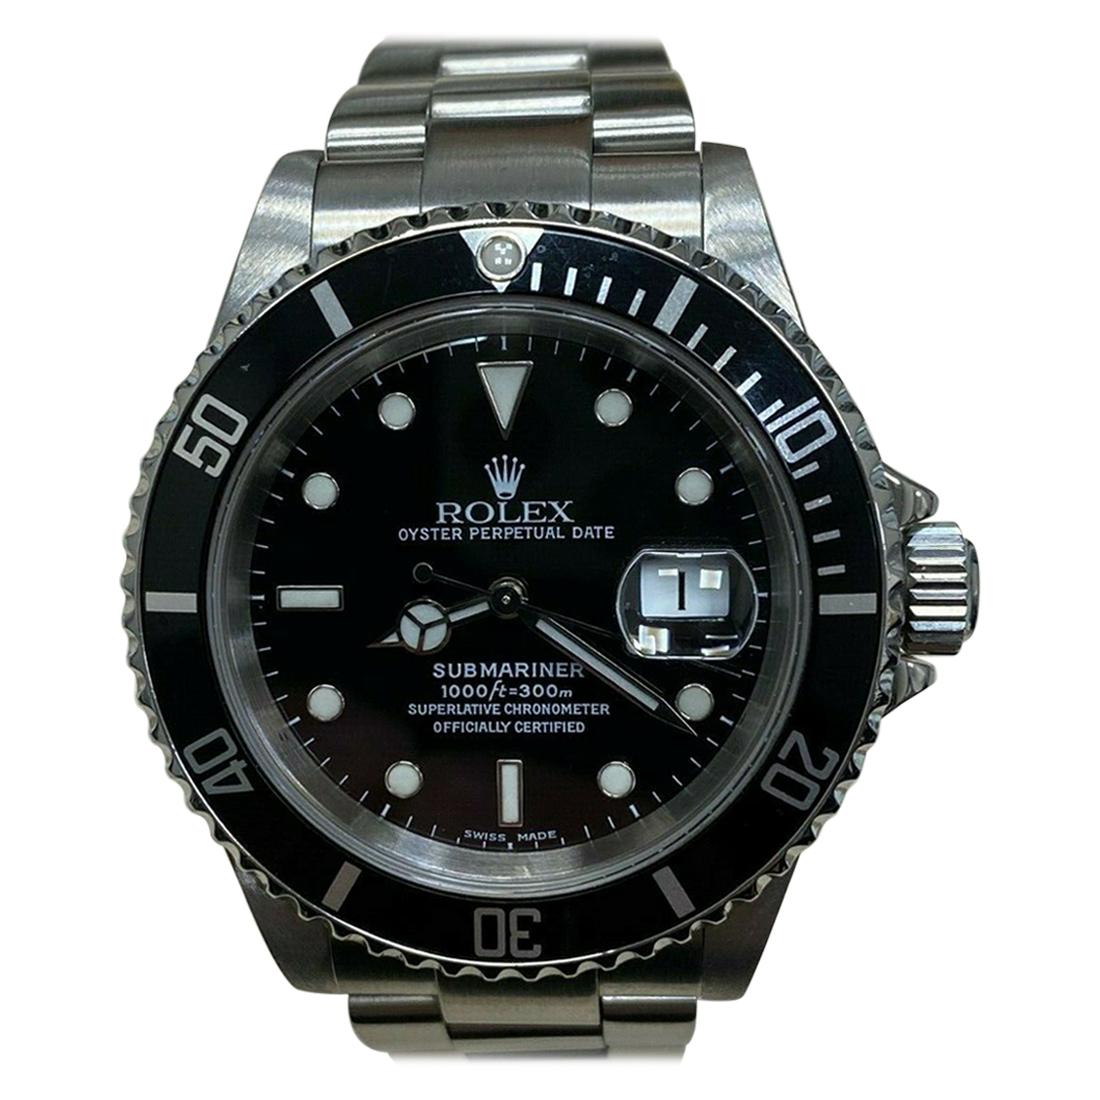 Rolex Submariner Date 16610 Black Dial Stainless Steel